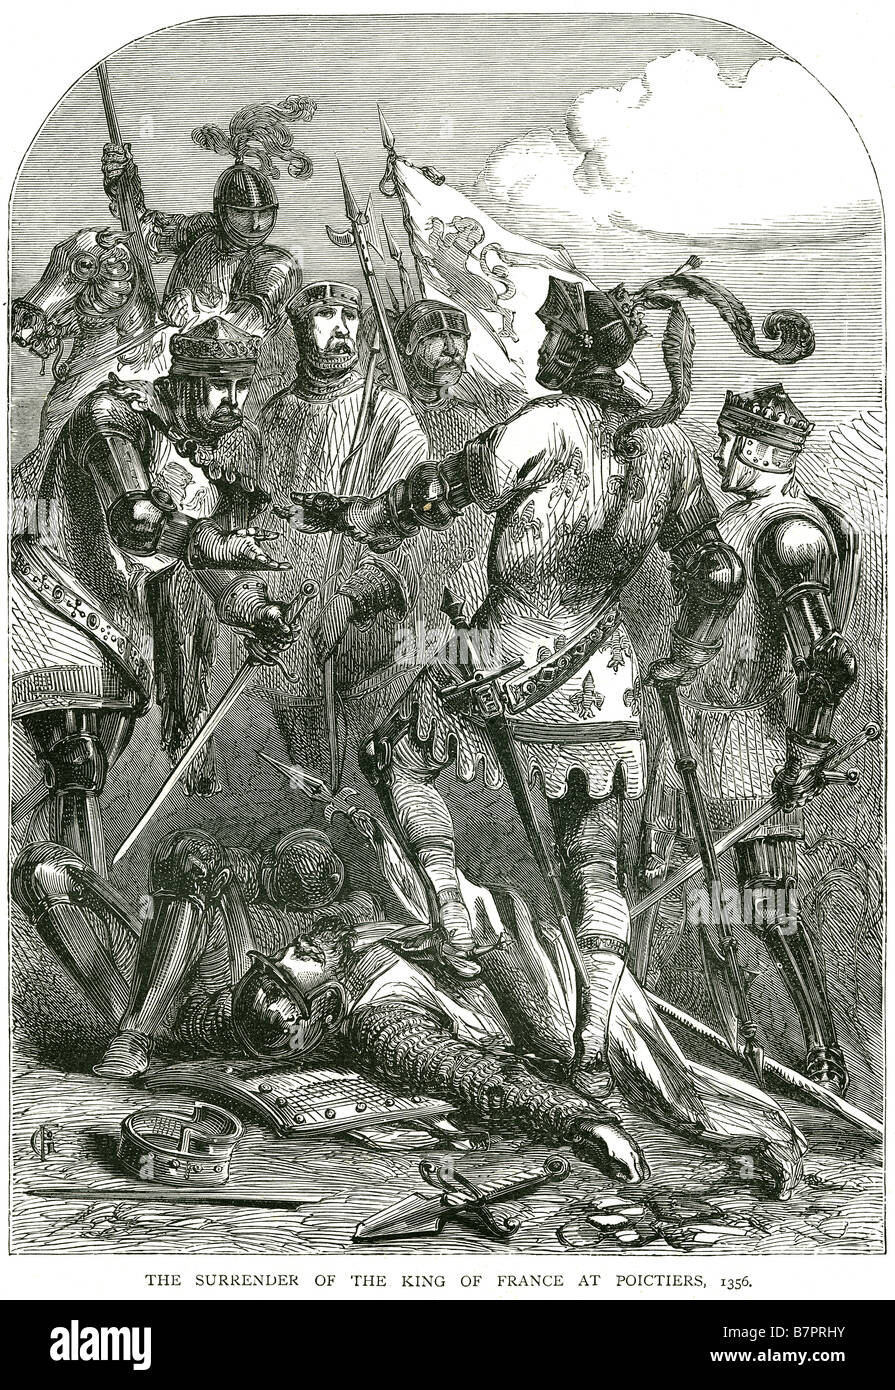 surrender King France Poictiers 1356 Solider fighting battle war attack death siege fight charge The Battle of Poitiers was foug Stock Photo